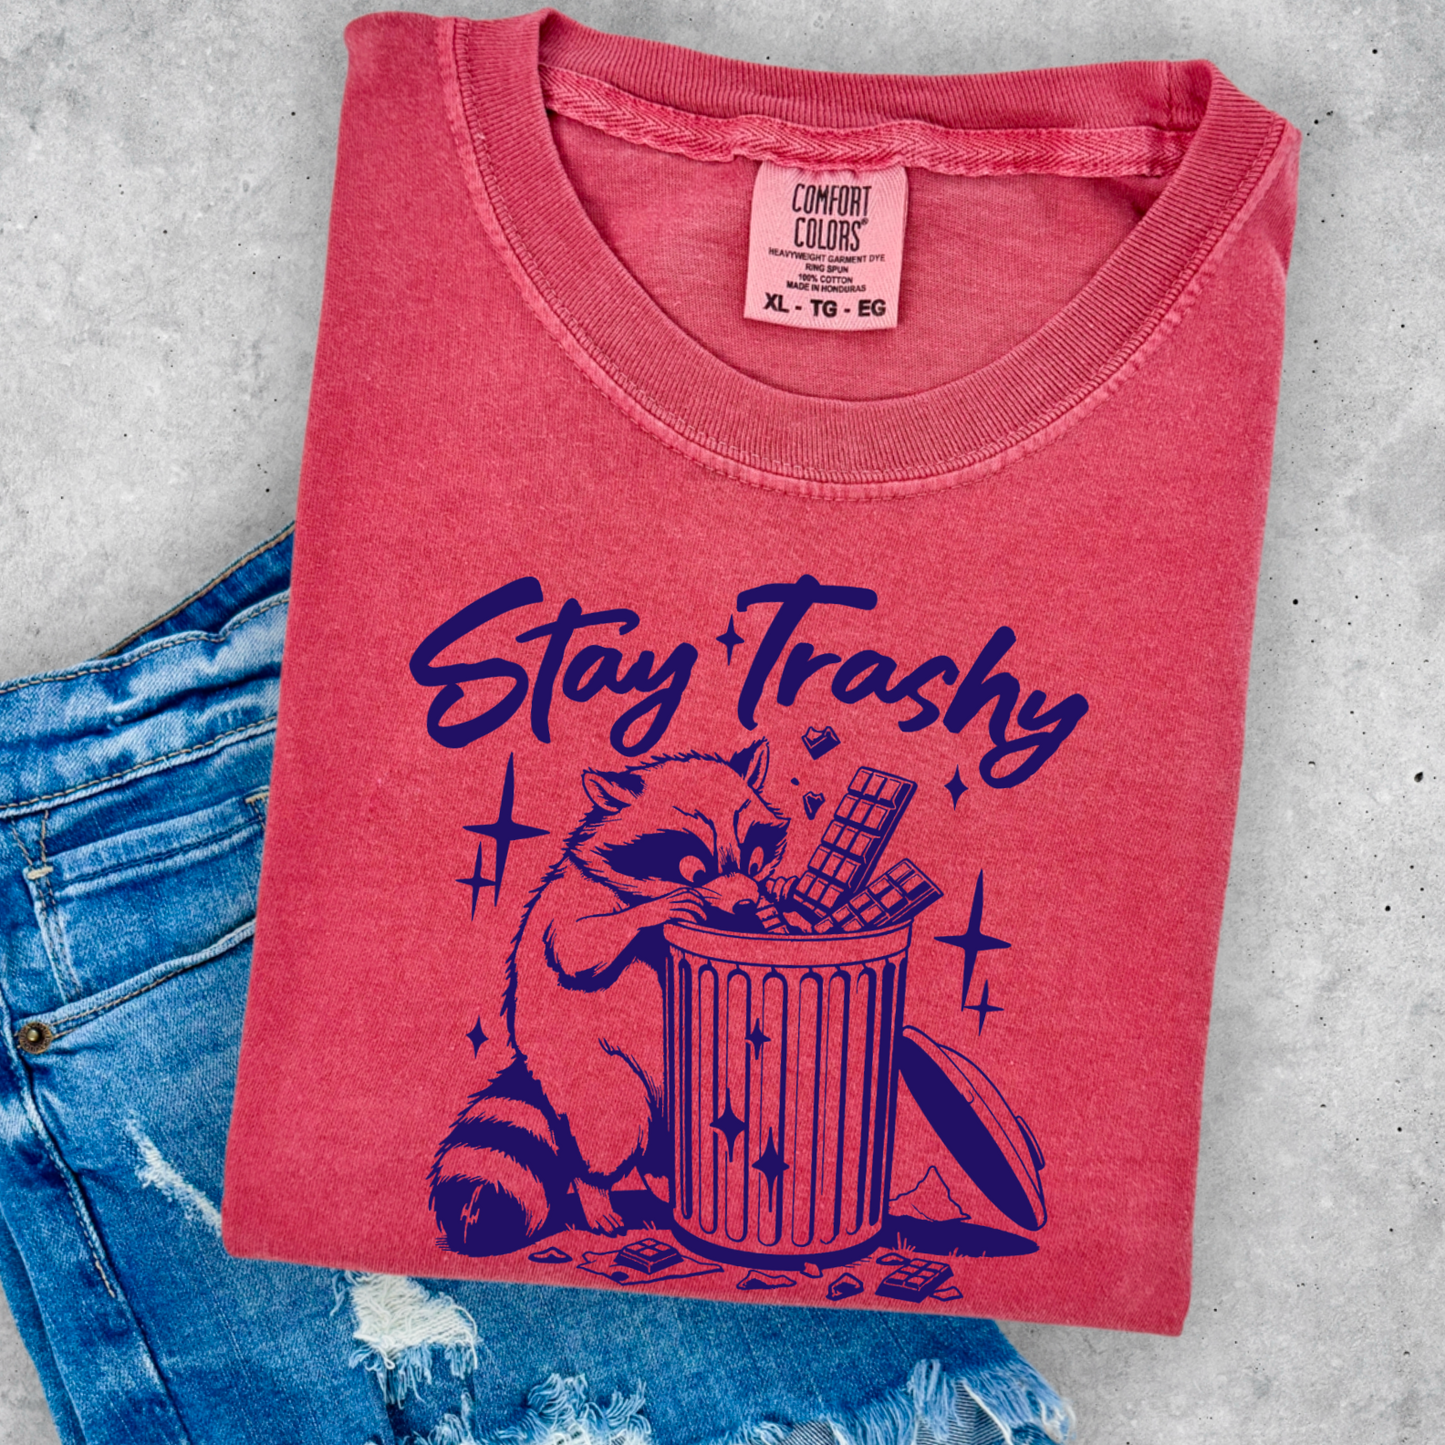 Stay Trashy Comfort Color Graphic Tee As Pictured Is Crimson